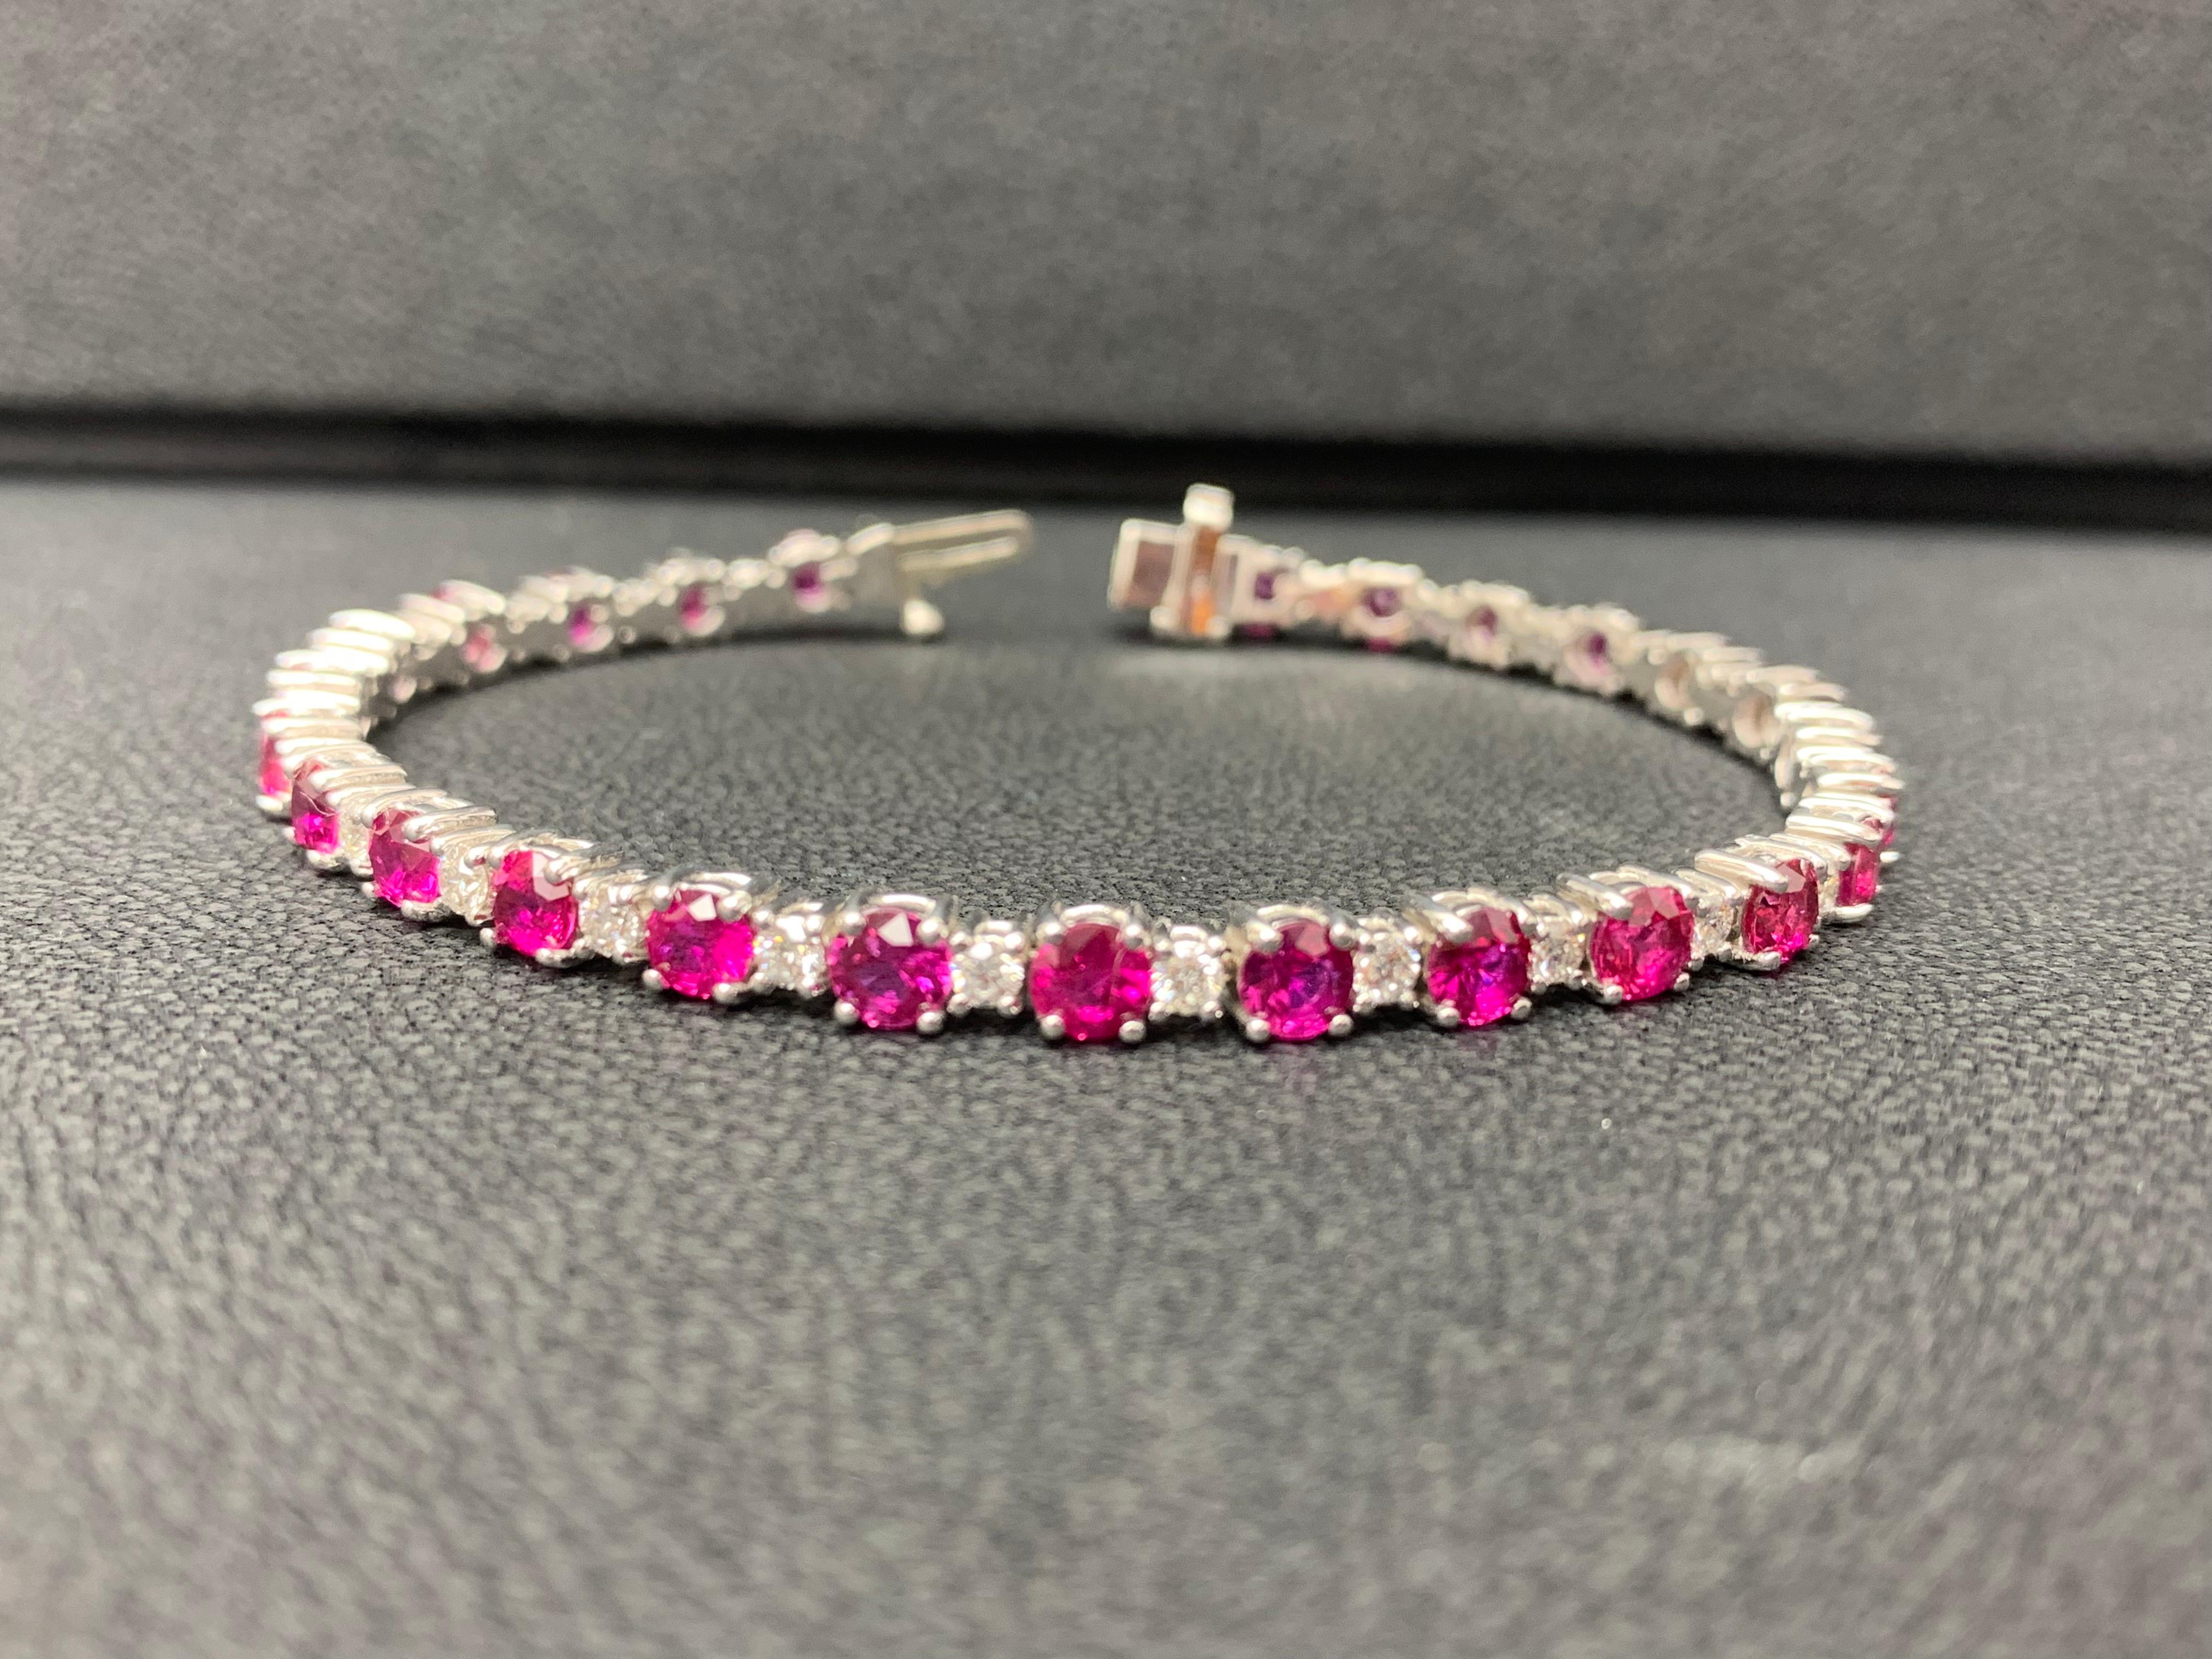 Showcasing 8 carats total of 27 rubies, elegantly alternating with 1.48 carats of 27 round brilliant diamonds. Made in 14 karat white gold.

Style available in different price ranges. Prices are based on your selection of the 4C’s (Carat, Color,